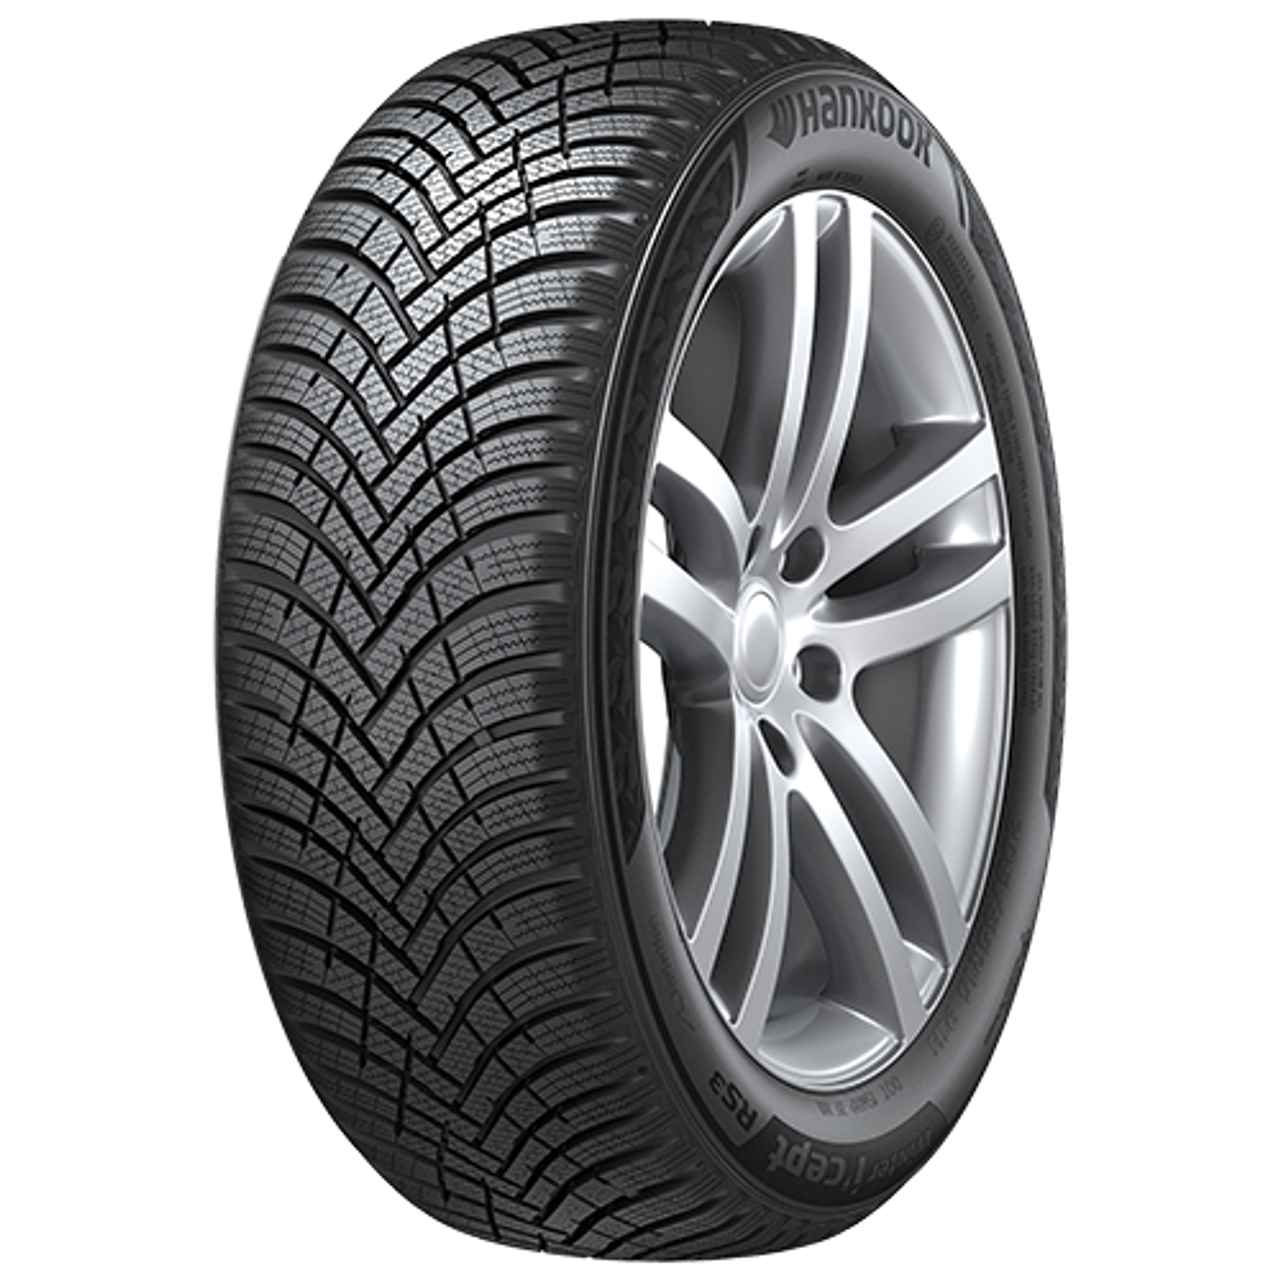 HANKOOK WINTER I*CEPT RS3 165/65R14 83T BSW